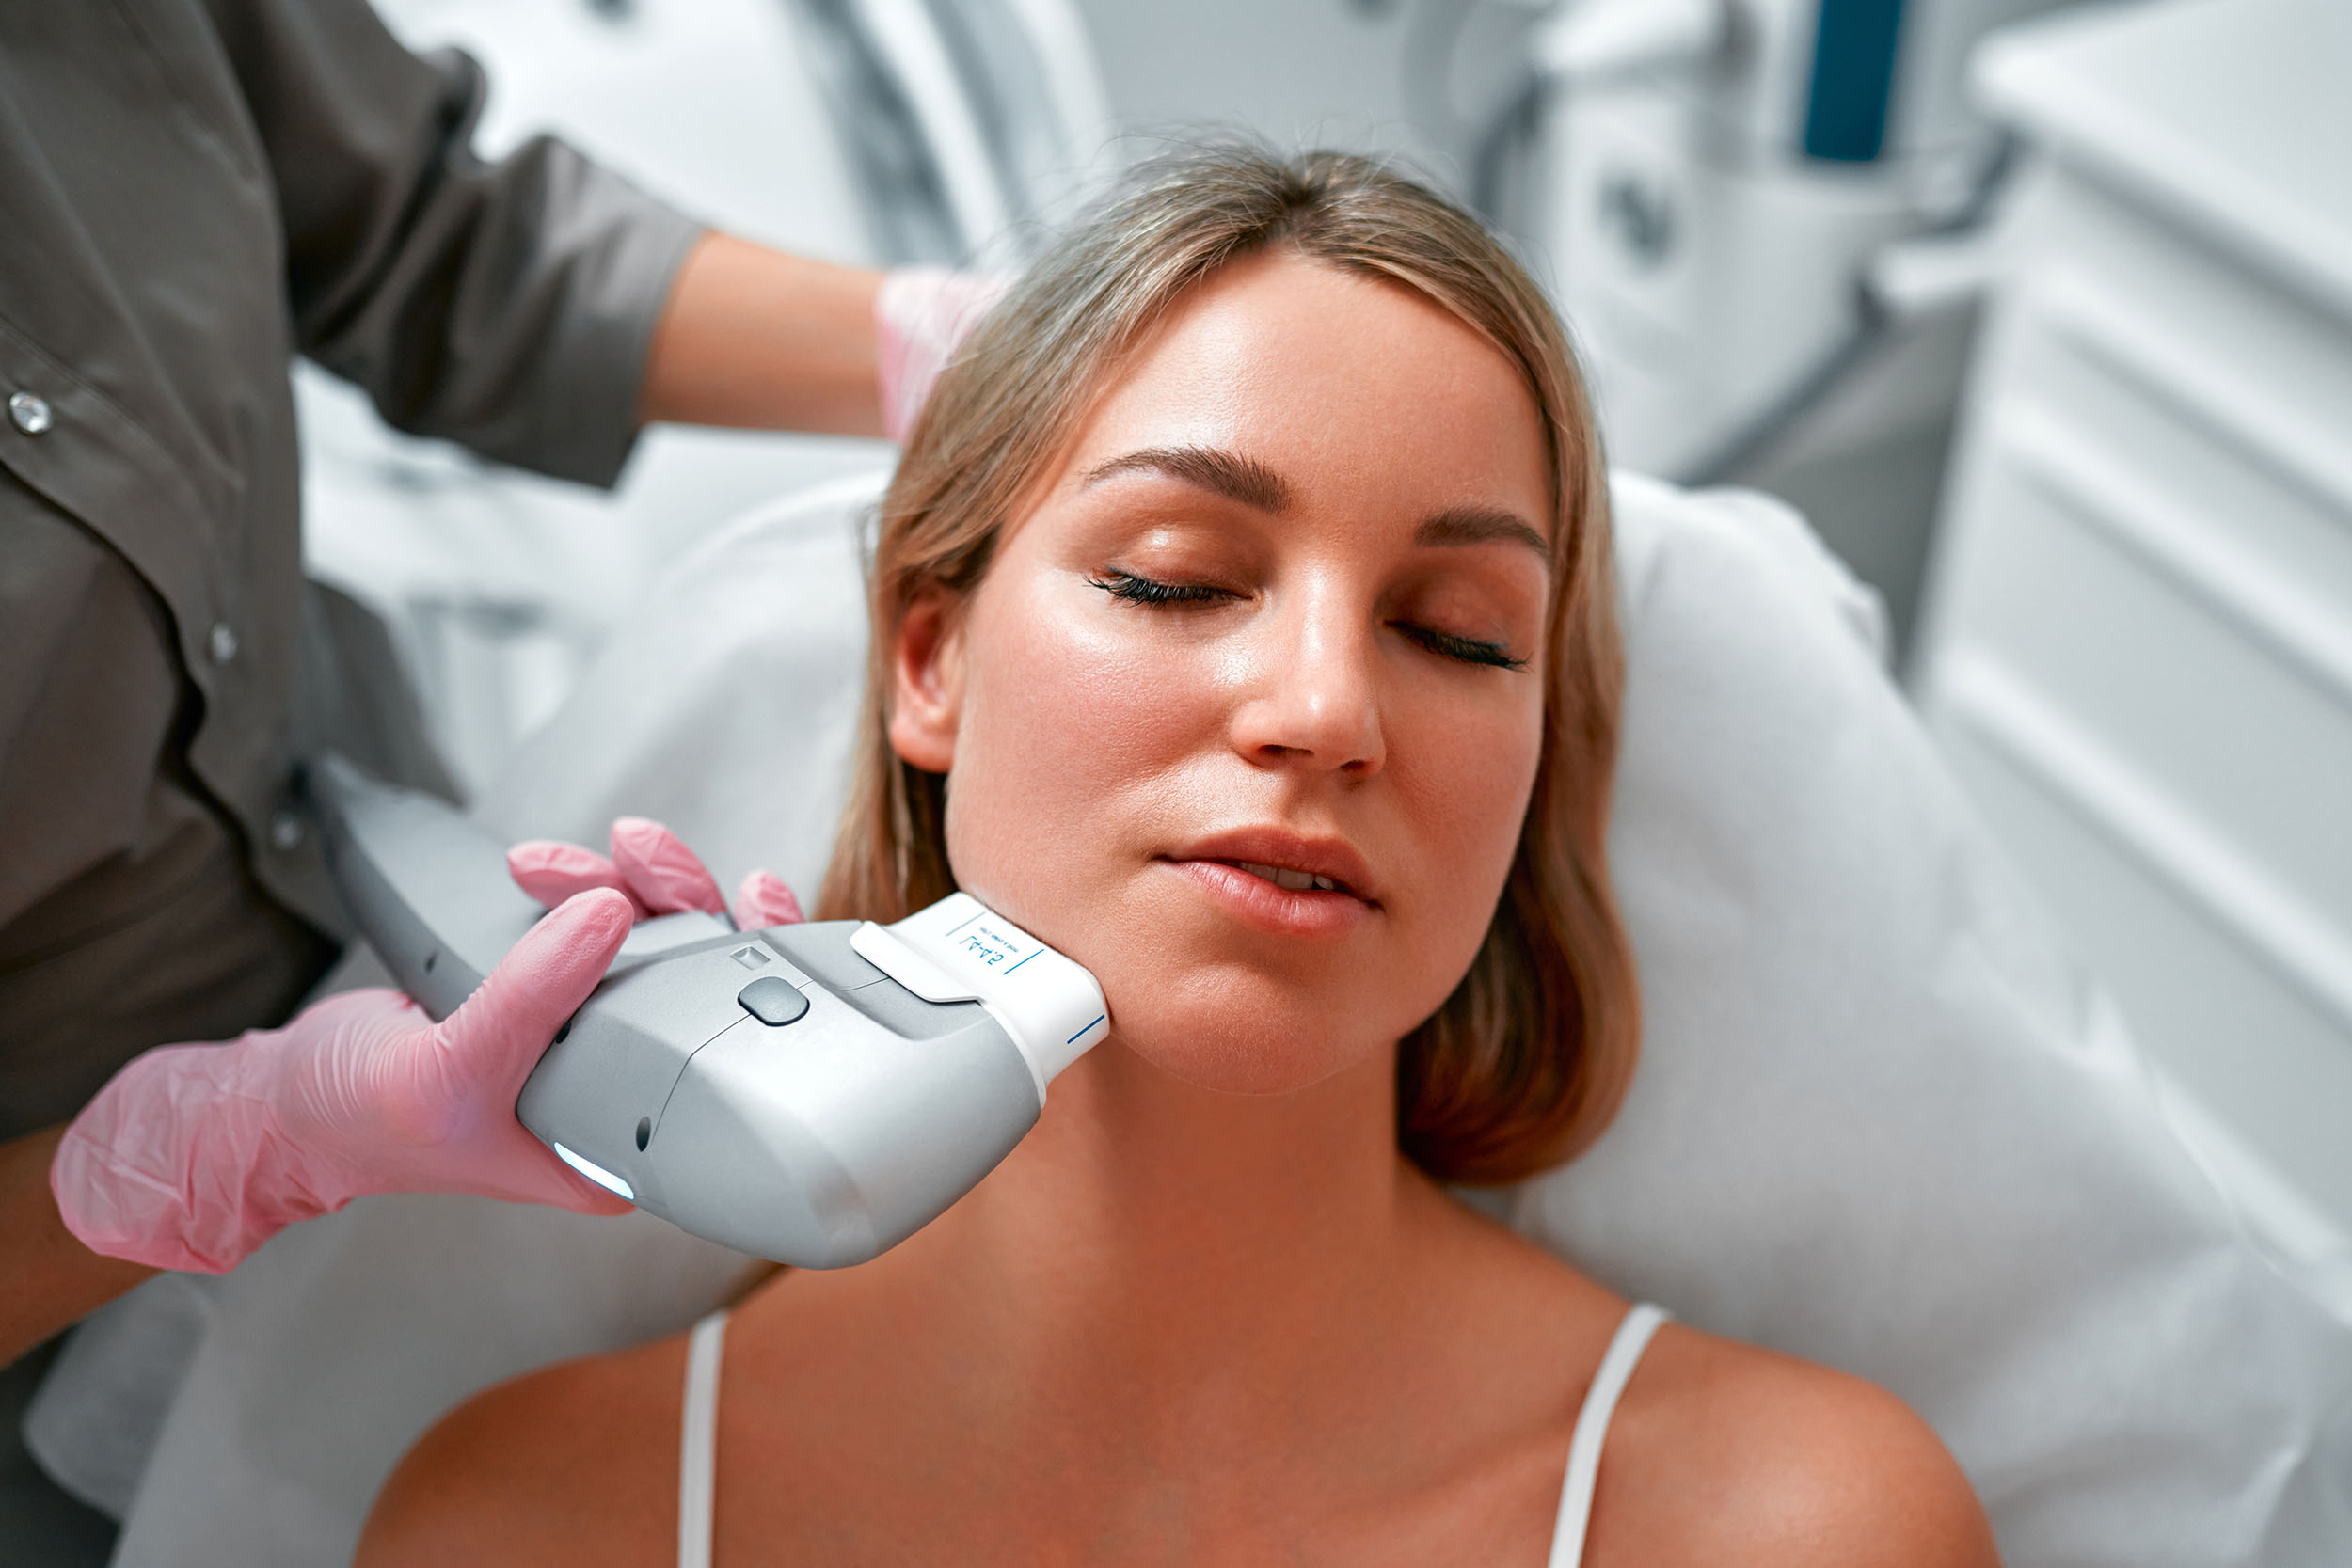 Defining Beauty Wellness & Med Spa in Tampa offers IPL therapy